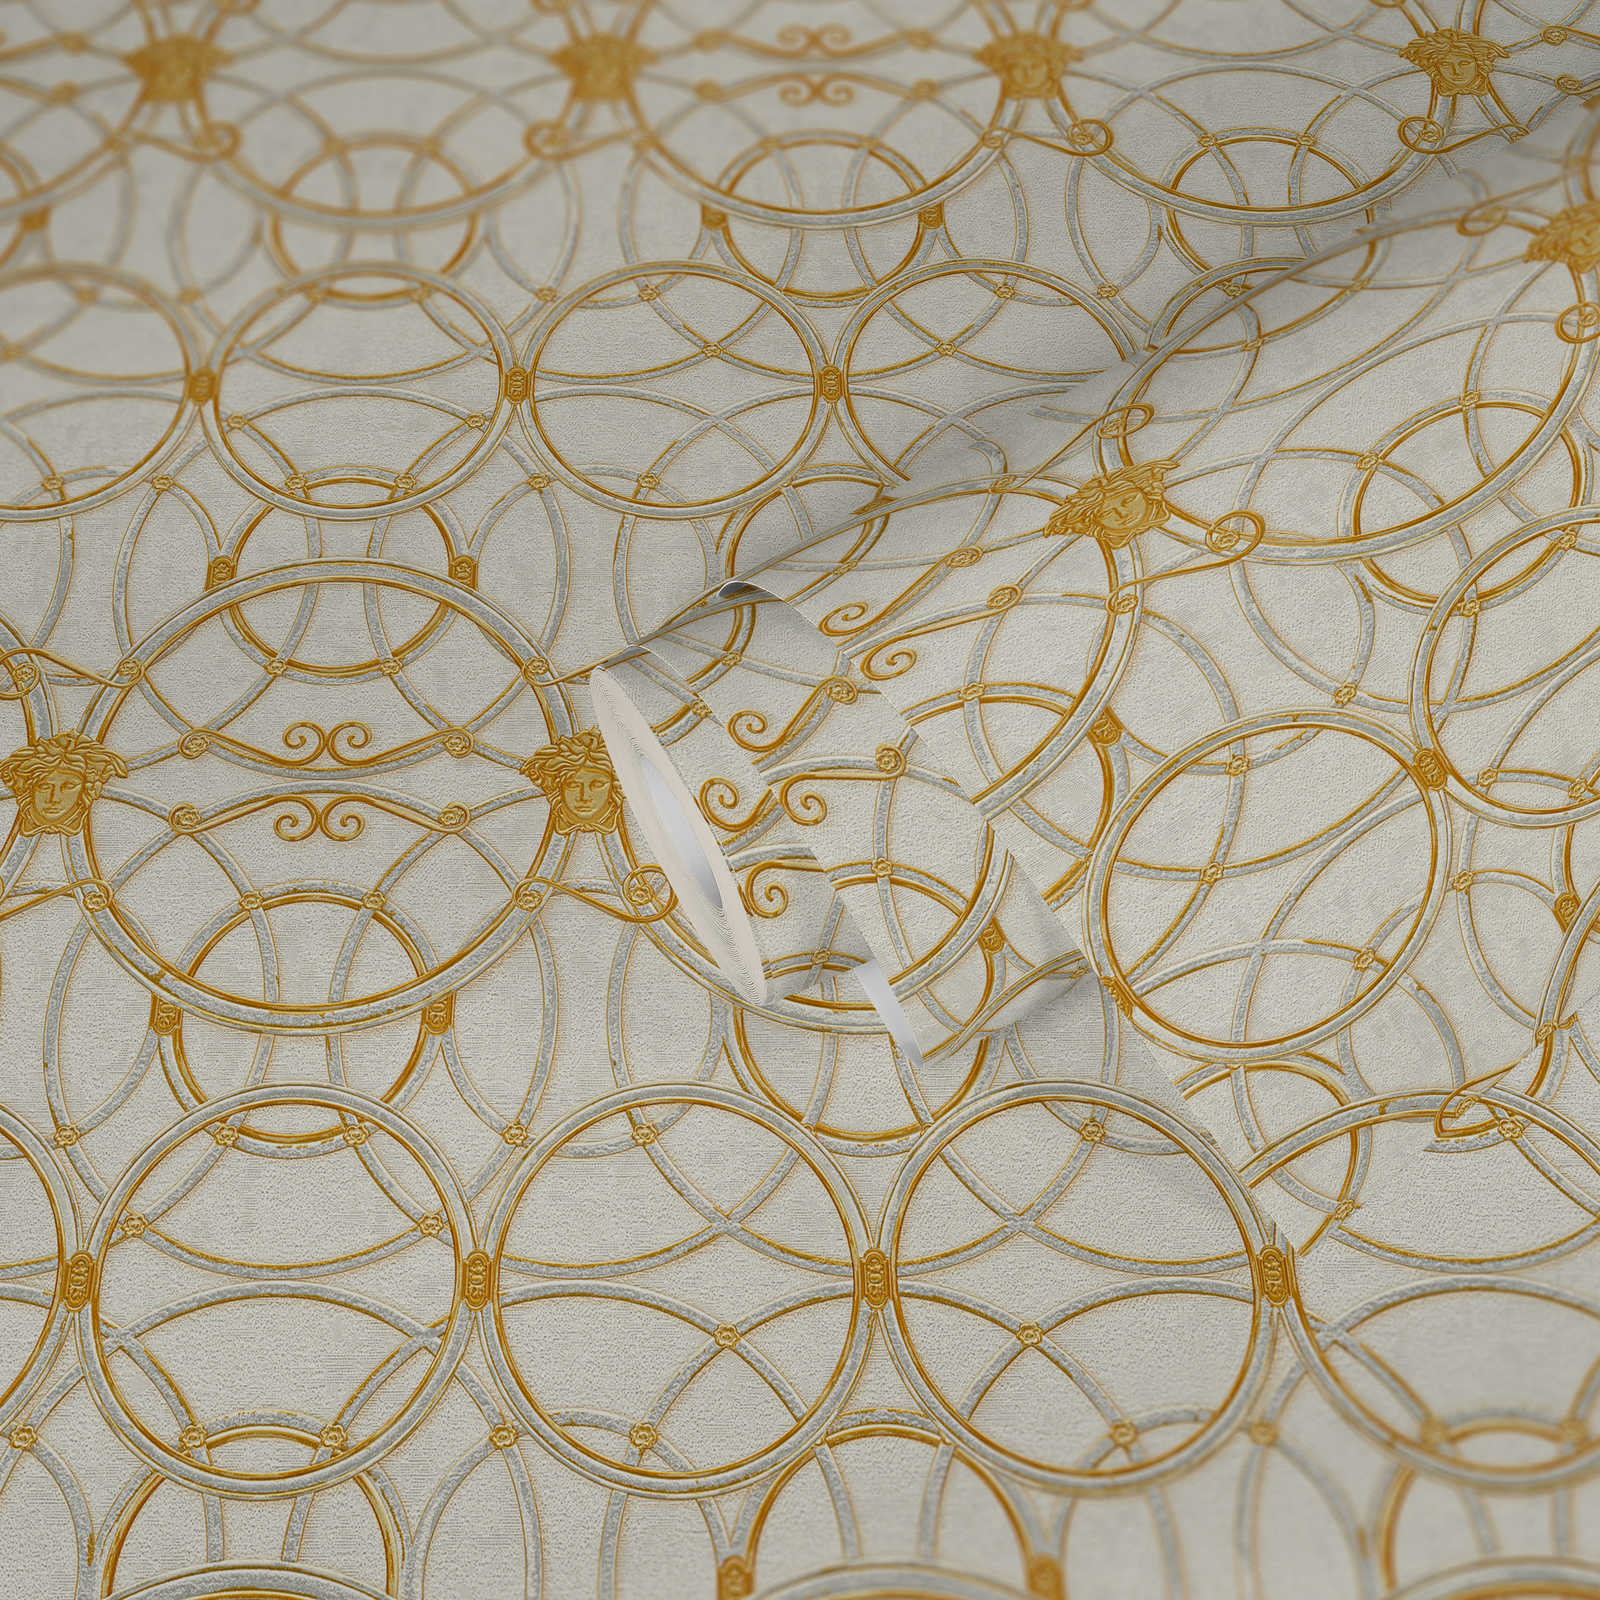             VERSACE Home wallpaper circle pattern and Medusa - gold, cream, white
        